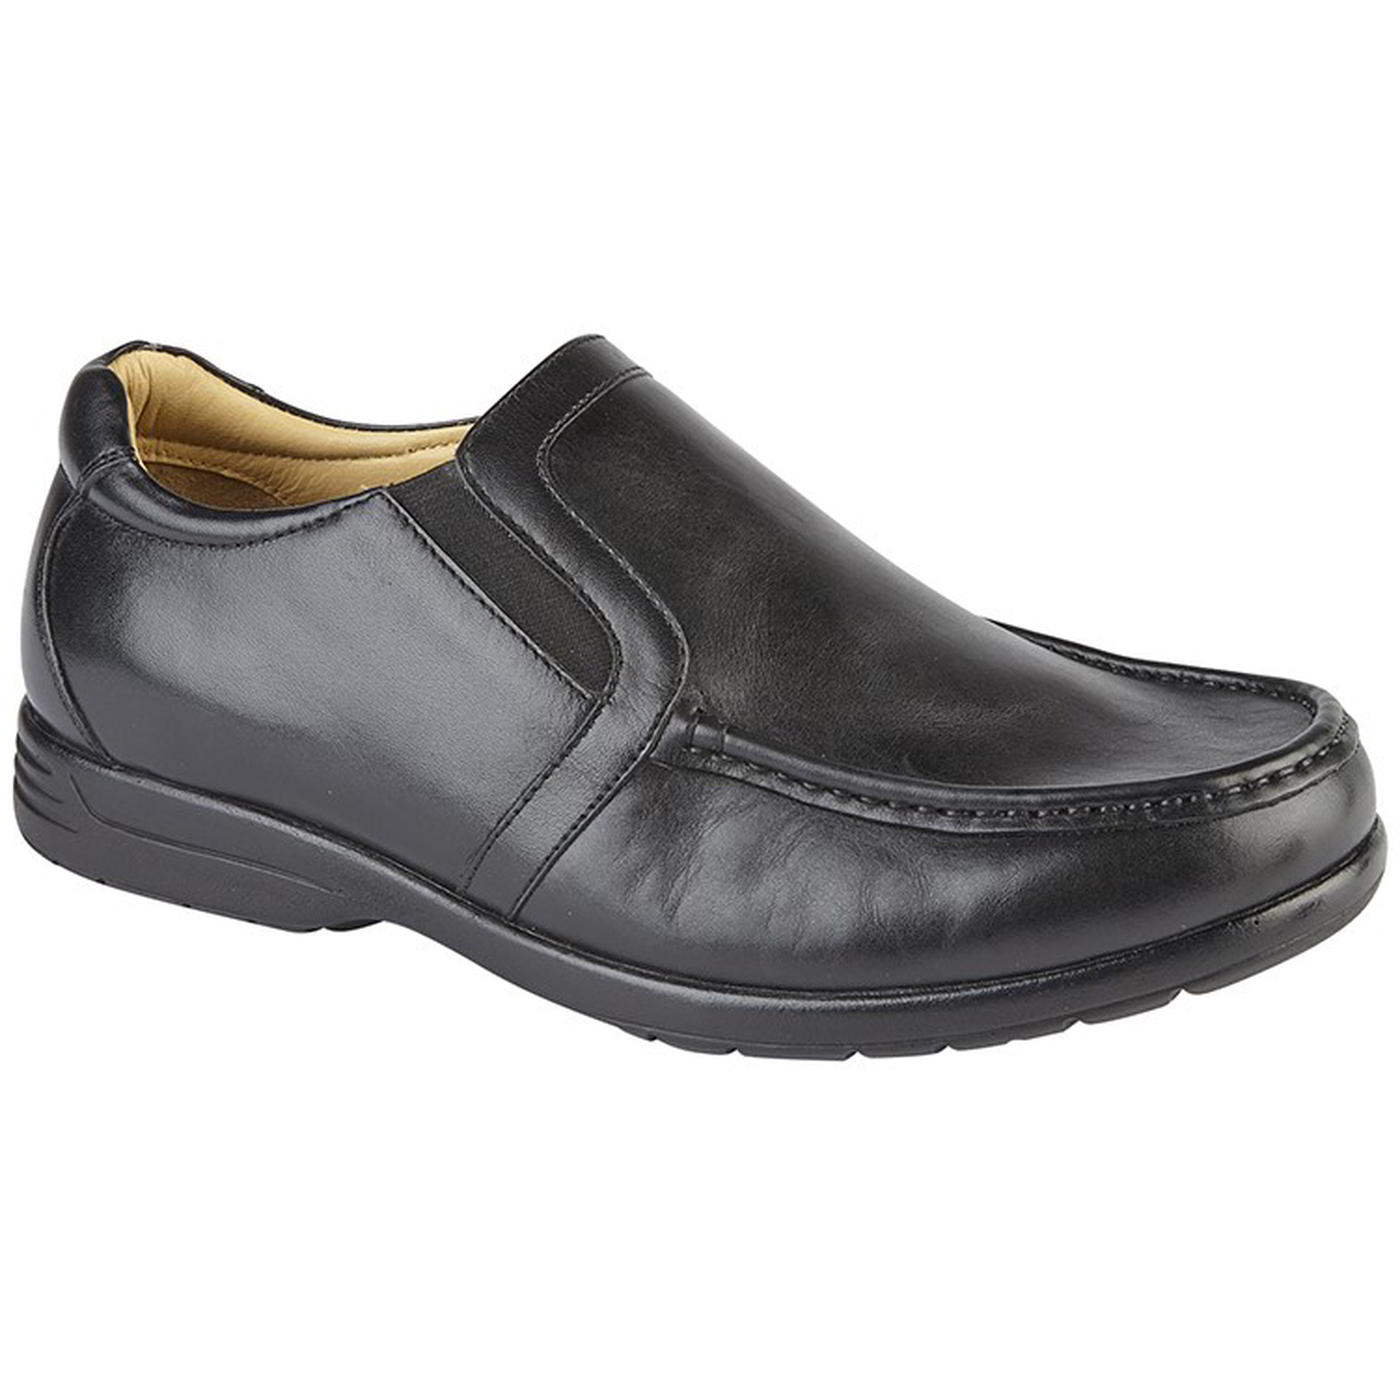 Roamers Men's Extra Wide Leather Slip On Shoes M984A - UK 9